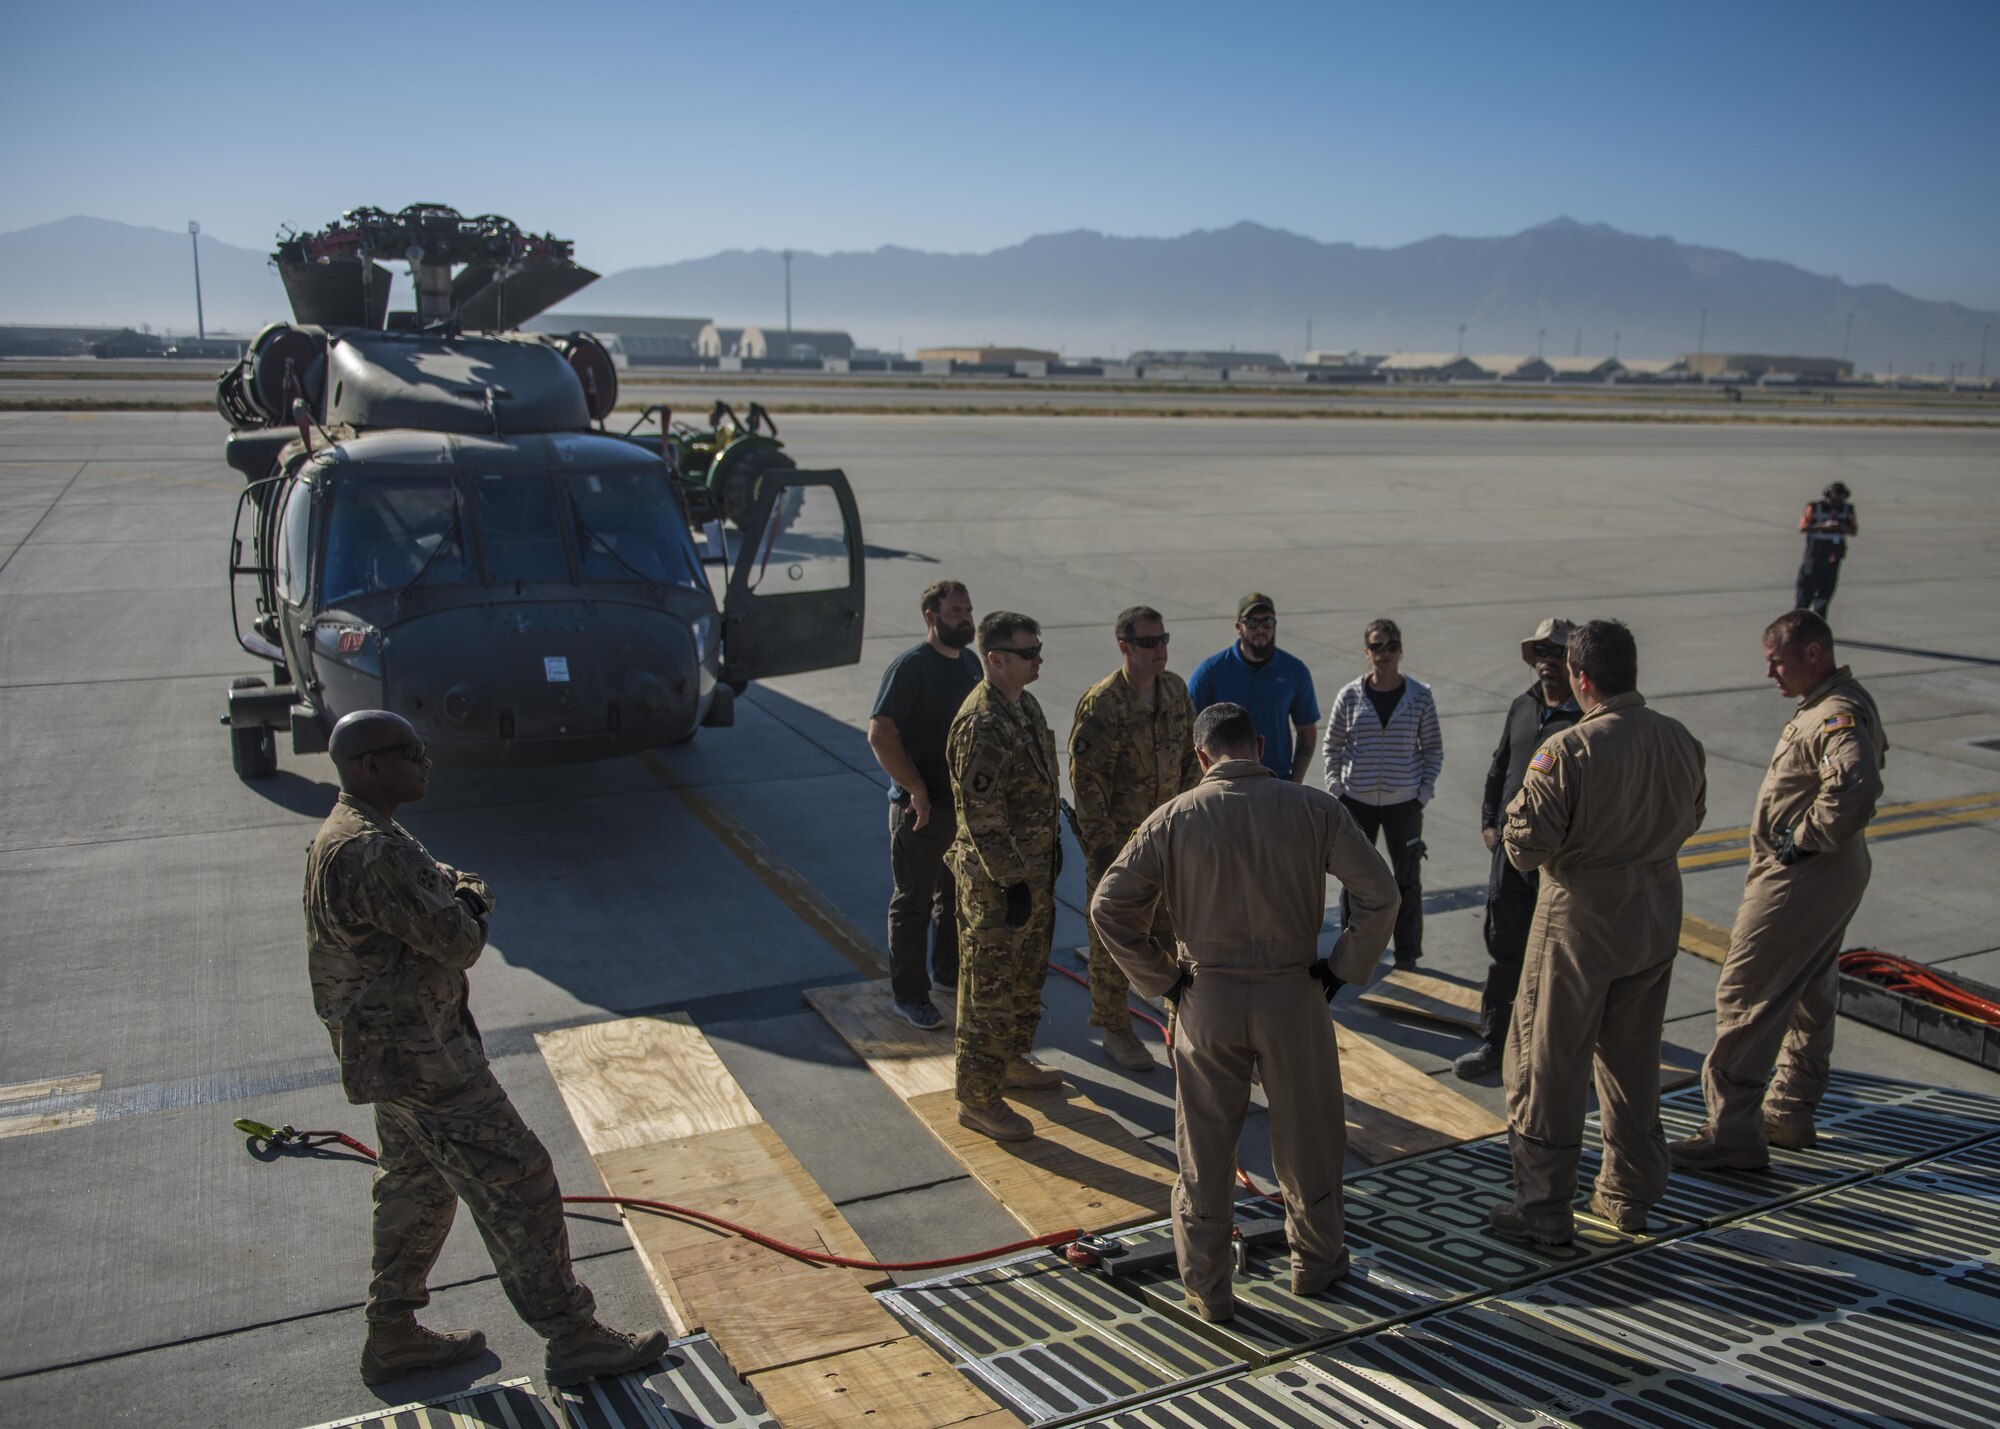 Senior Airman Maxwell Lucchesi, 436th Airlift Wing aircraft loadmaster, gives a mission and safety brief to other aircrew members, Bagram Airfield, Afghanistan, Sept. 8, 2016. Lucchesi was part of an aircrew team from Dover Air Force Base, who traveled to Bagram to help pack and transport Sikorsky UH-60 Blackhawks back to home stations. (U.S. Air Force photo by Senior Airman Justyn M. Freeman)